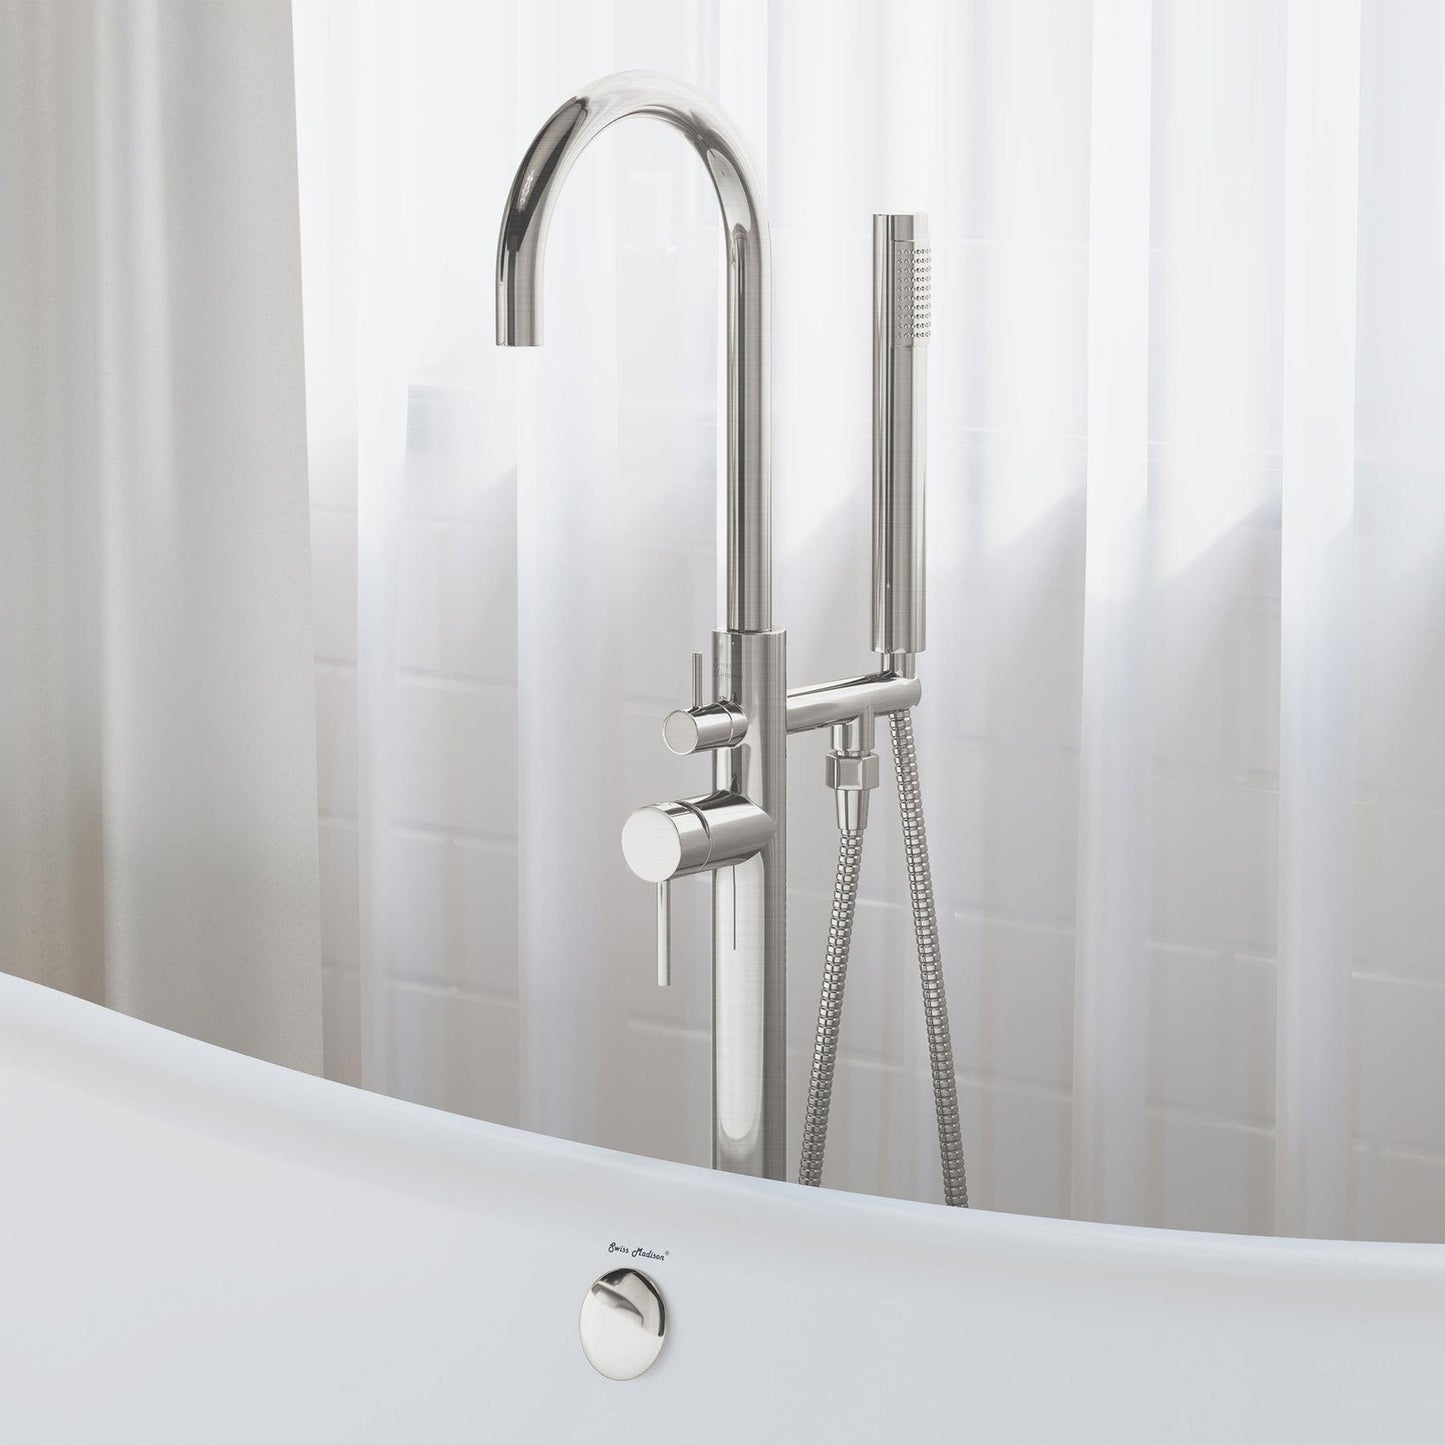 Swiss Madison Ivy 43" Brushed Nickel Single Hole Floor Mounted Bathtub Faucet With Hand Shower, Tub Spout and Handle